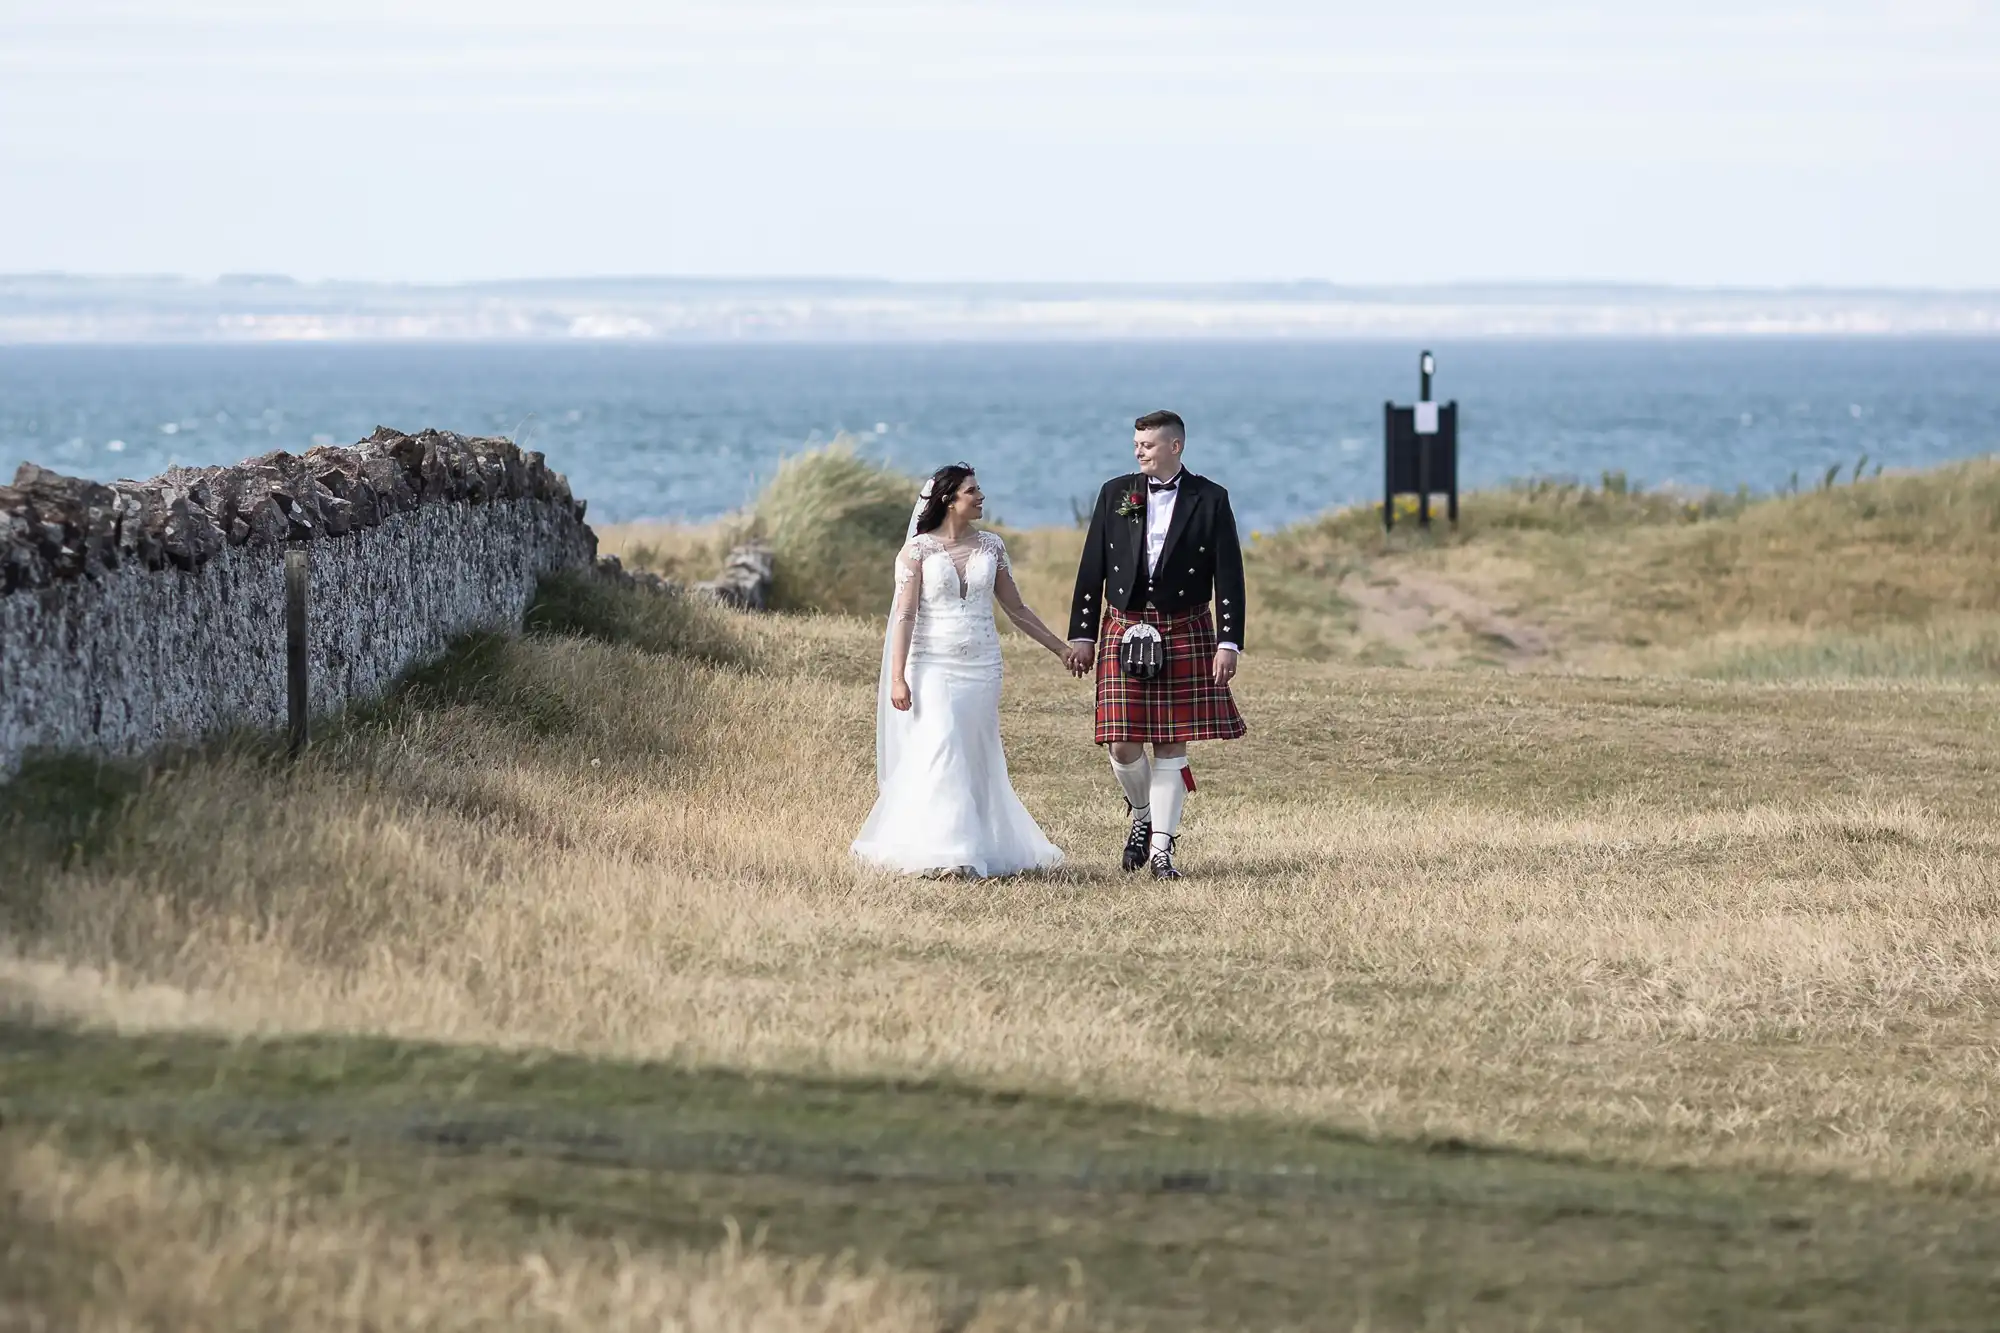 Bride in white dress and groom in traditional Scottish kilt holding hands on a coastal path with a stone wall and sea in the background.